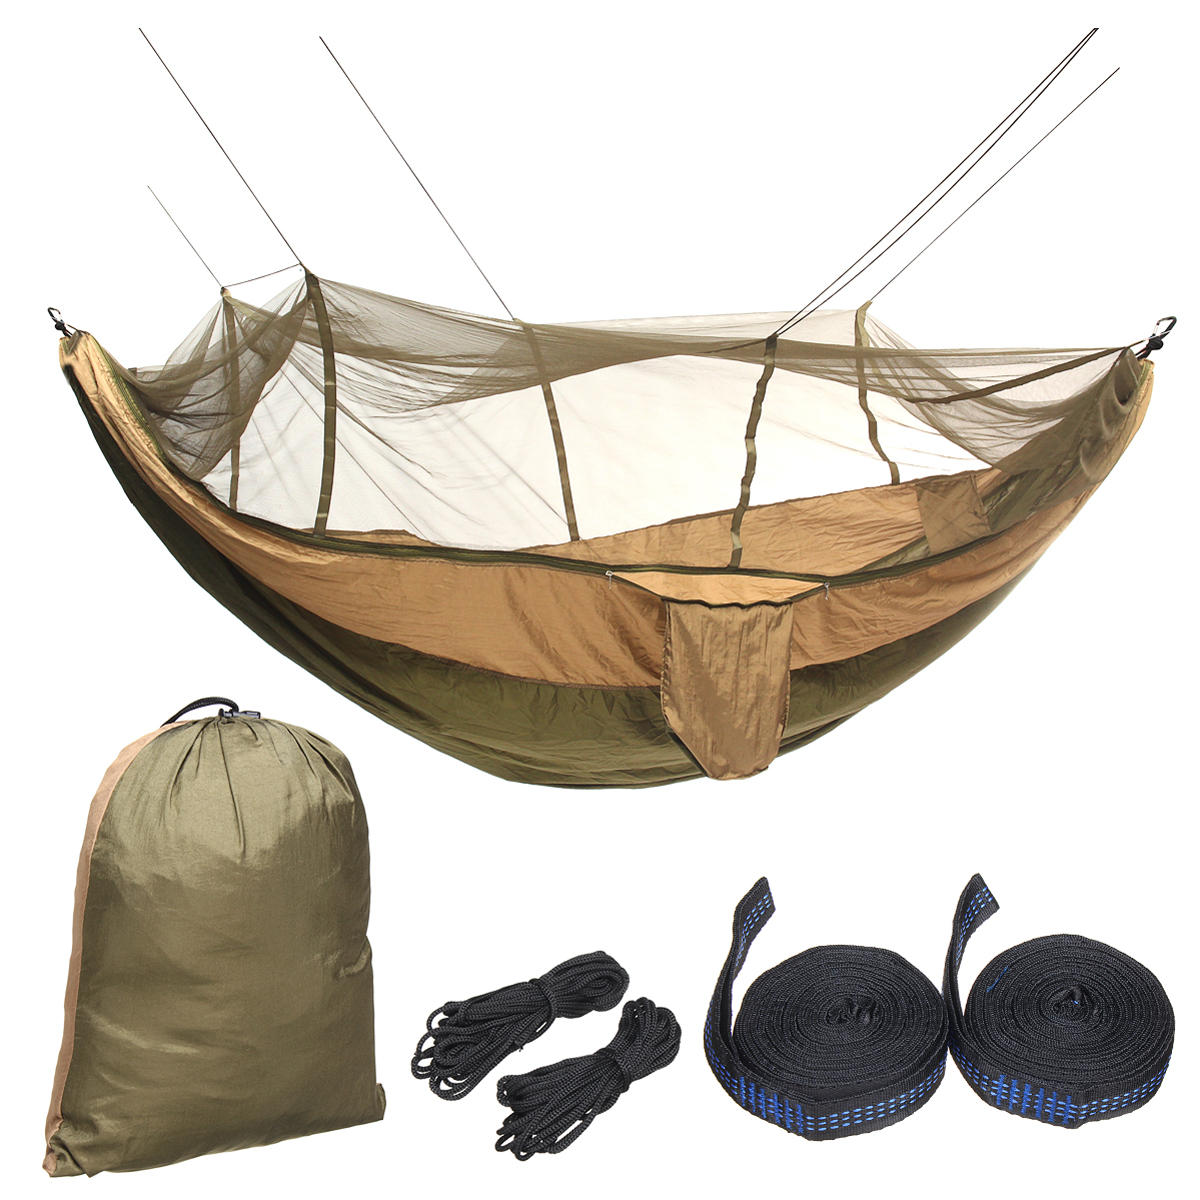 Outdoor 2 People Double Hammock Camping Tent Hanging Swing Bed With Mosquito Net